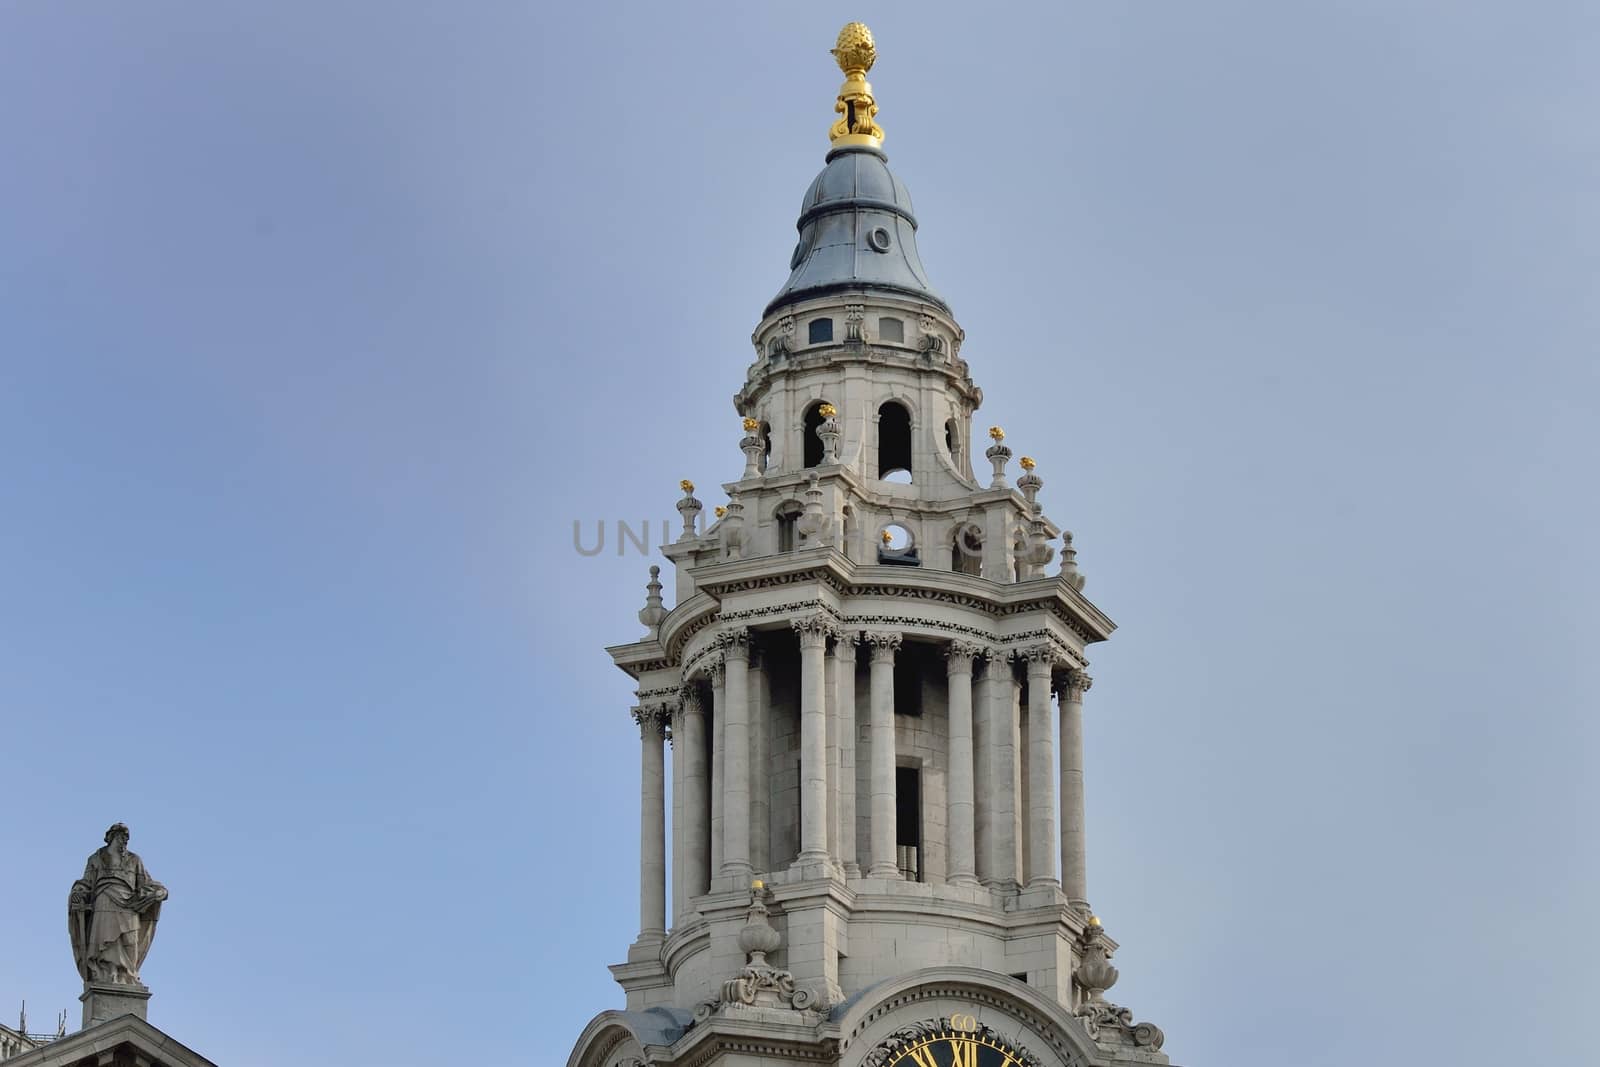  St Pauls Clock Tower Top by pauws99